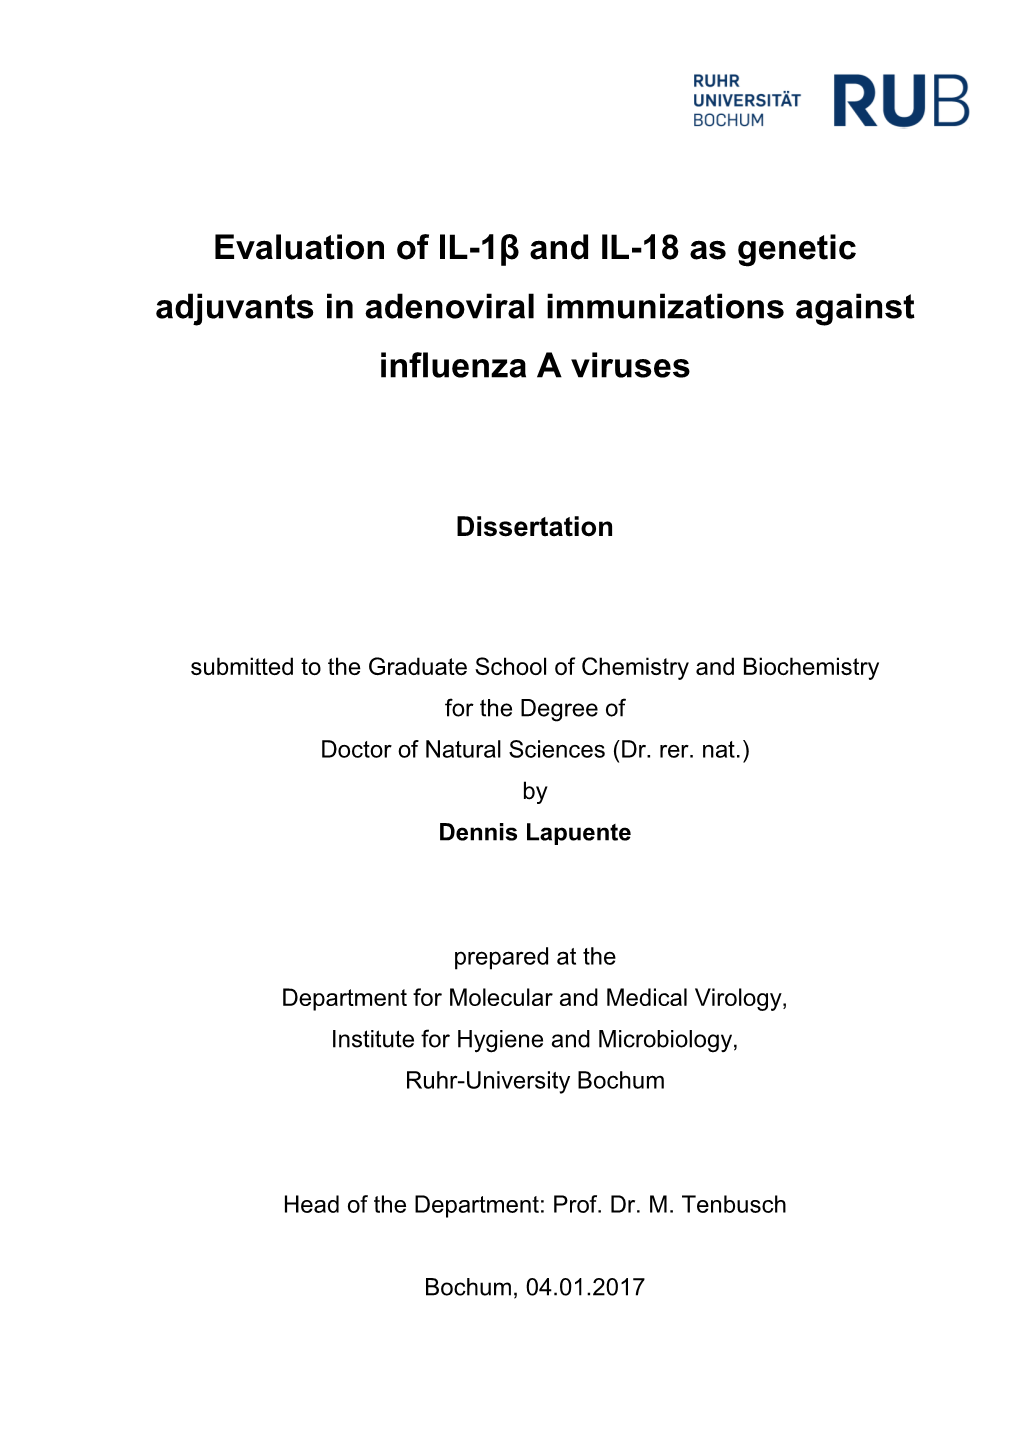 Evaluation of IL-1Β and IL-18 As Genetic Adjuvants in Adenoviral Immunizations Against Influenza a Viruses